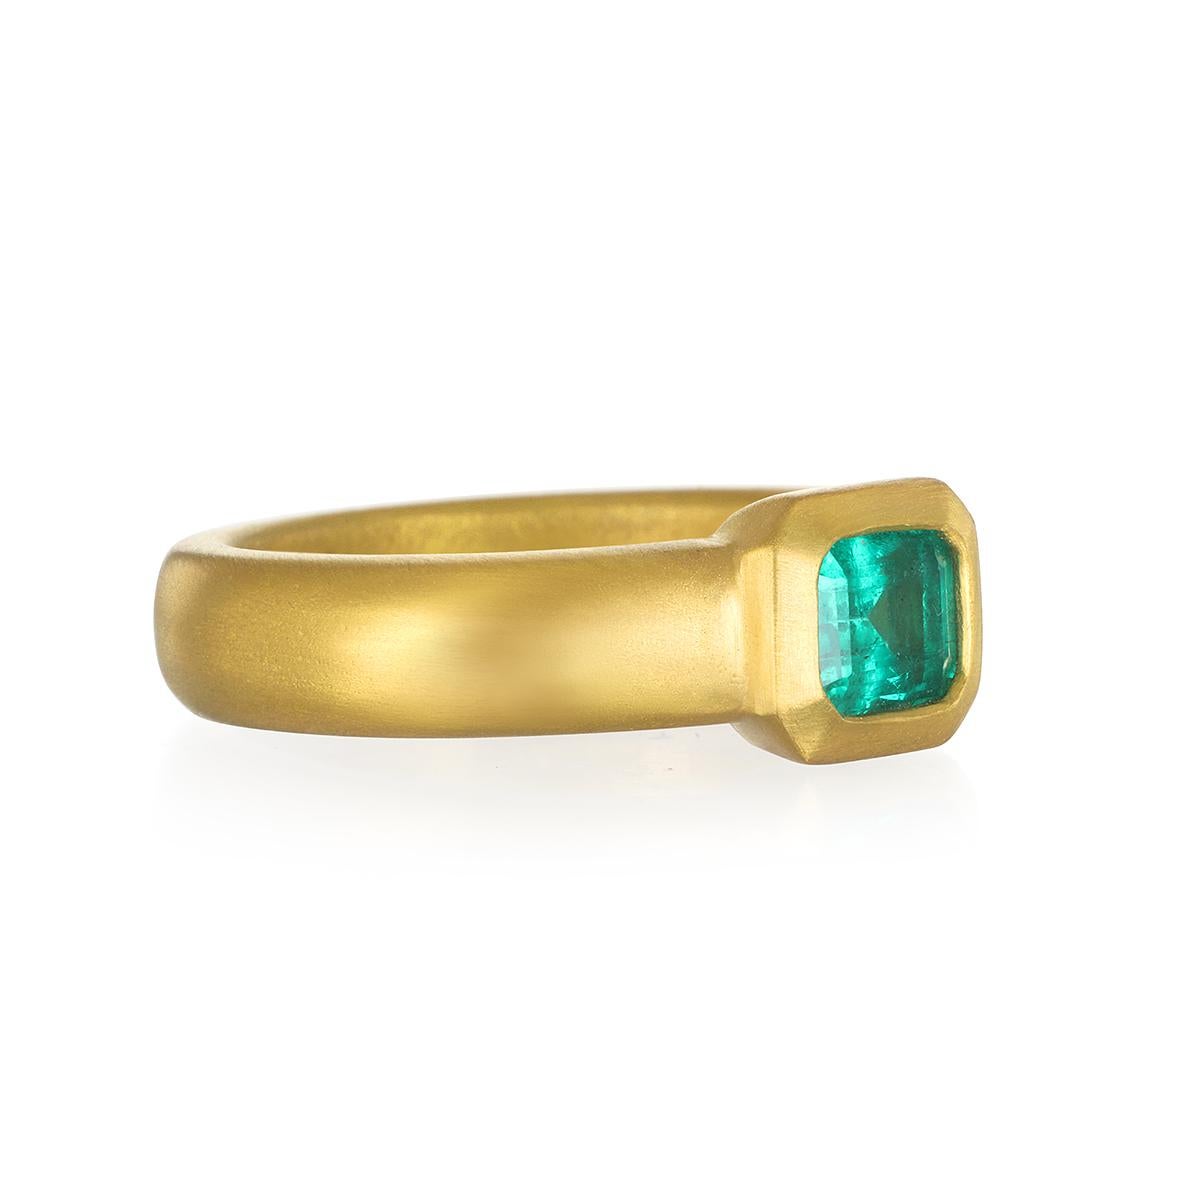 Through time, the emerald has been considered a symbol of truth and love. Here, Faye Kim has created this striking 22 Karat Gold Emerald Bezel Ring, ideal as an engagement ring, statement ring, or for layering and stacking with other rings.

Emerald